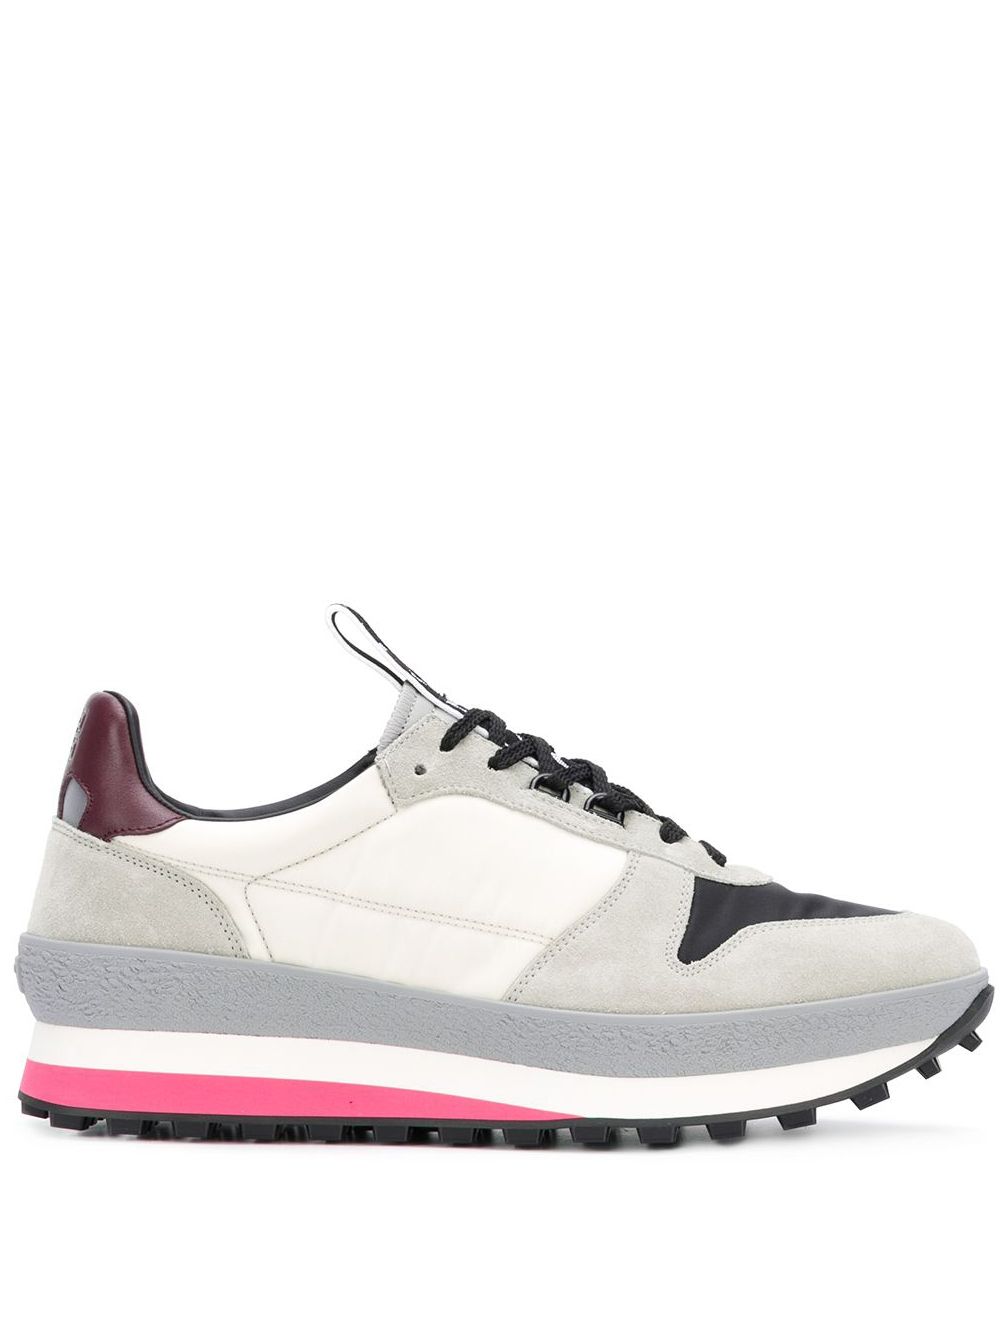 givenchy tr3 sneakers